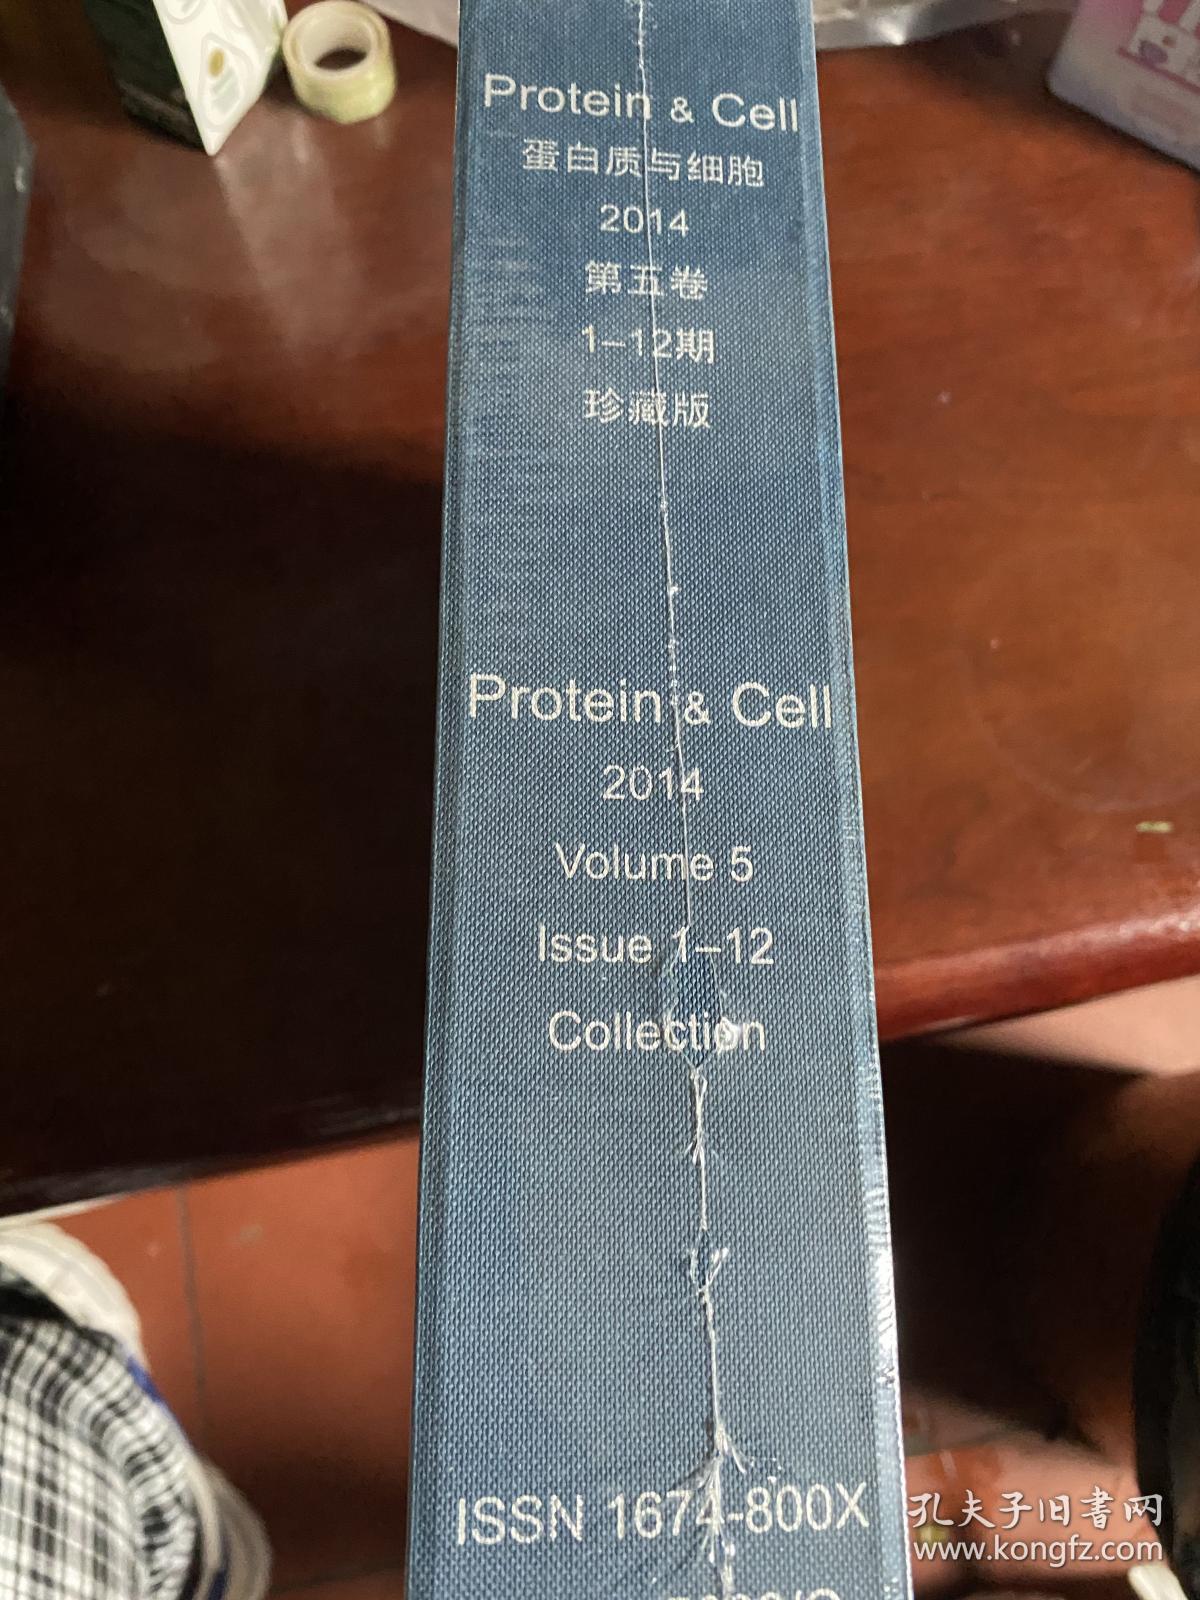 Protein cell